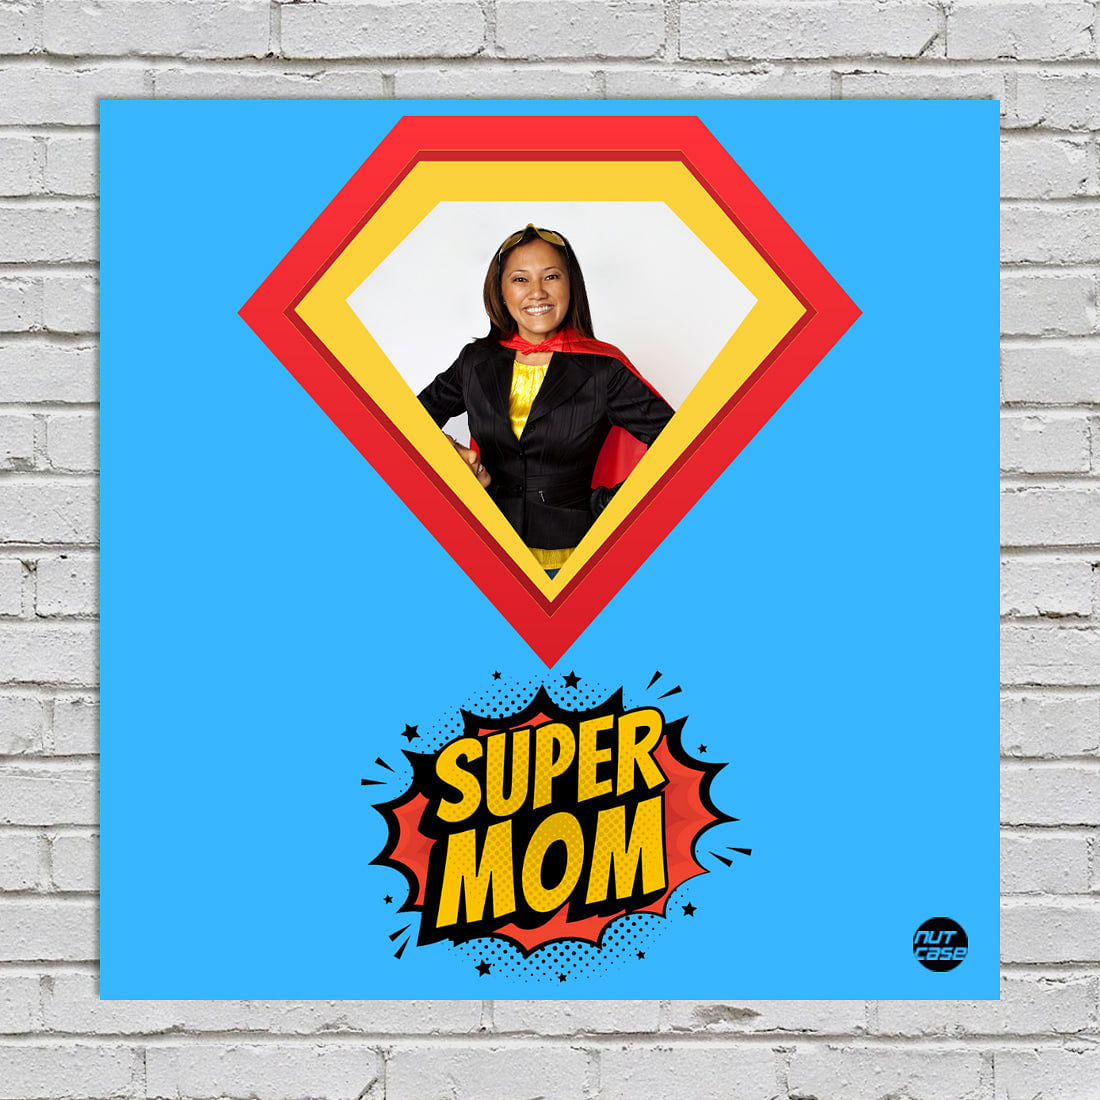 Gifts For Mom Customized Photo Gift - Super Hero Mummy Nutcase